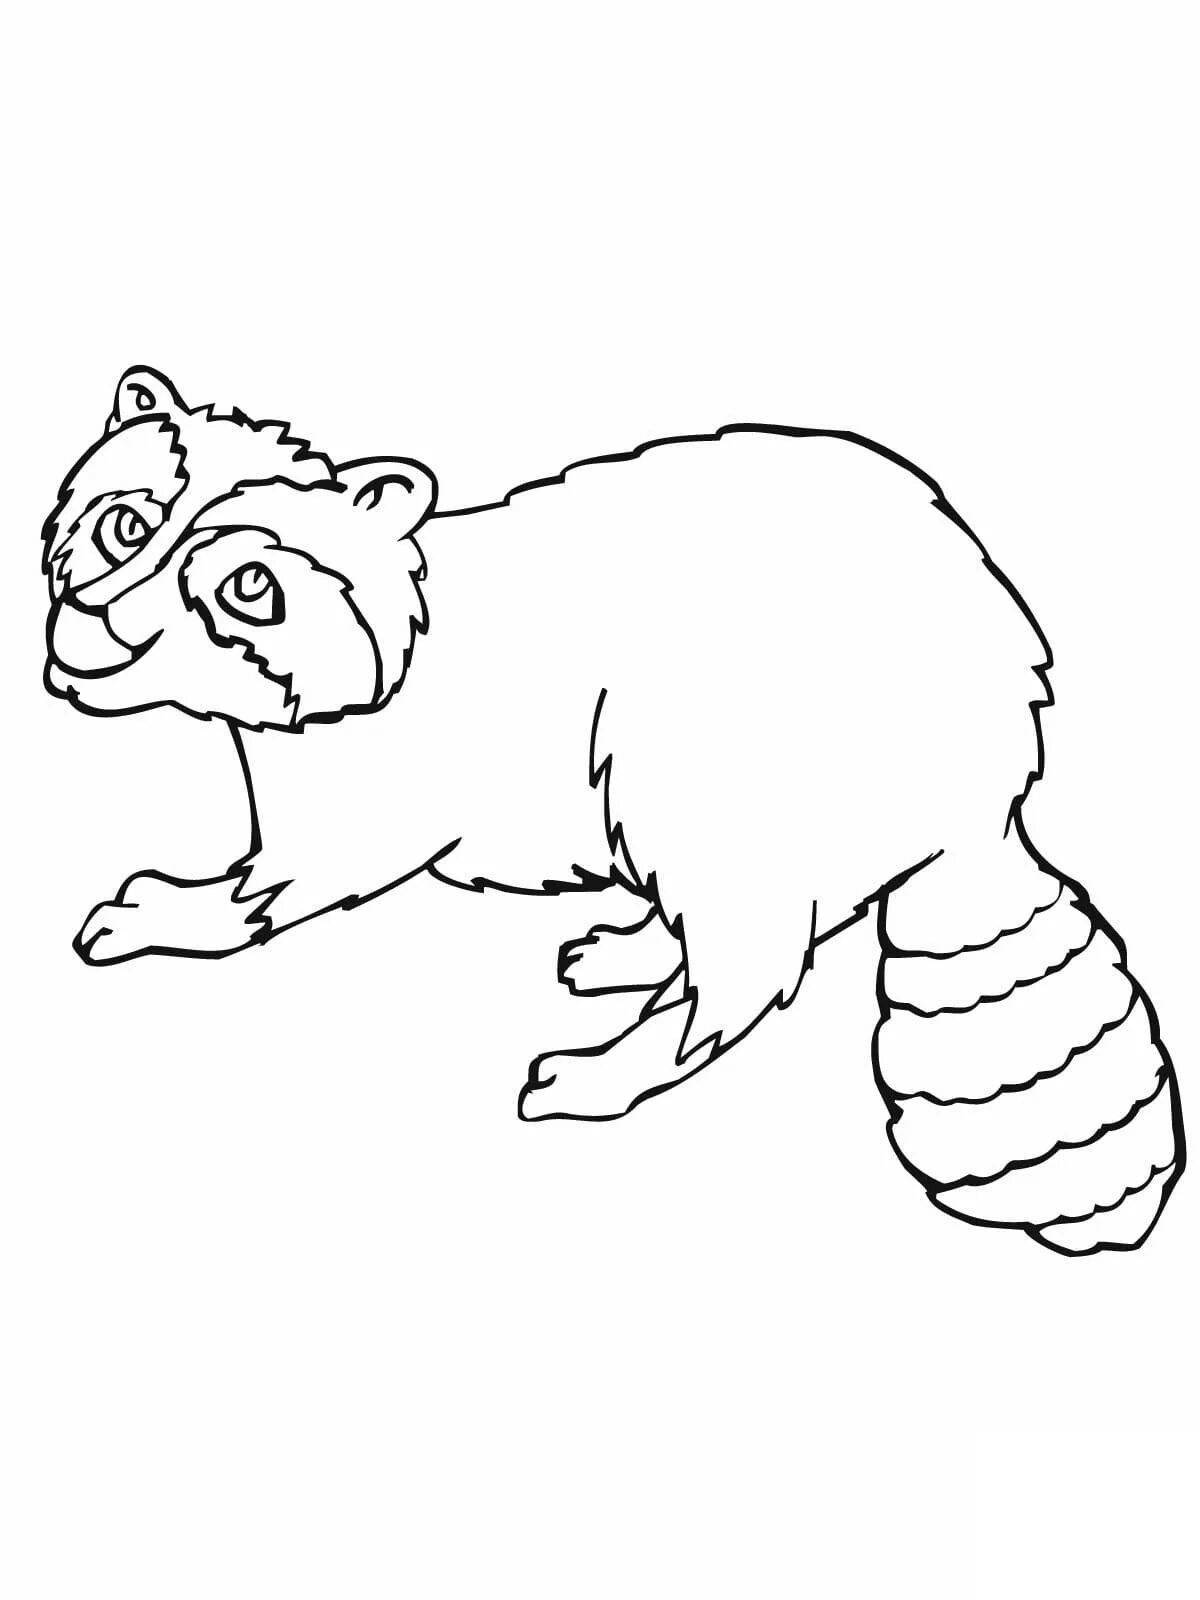 Coloring page playful raccoon